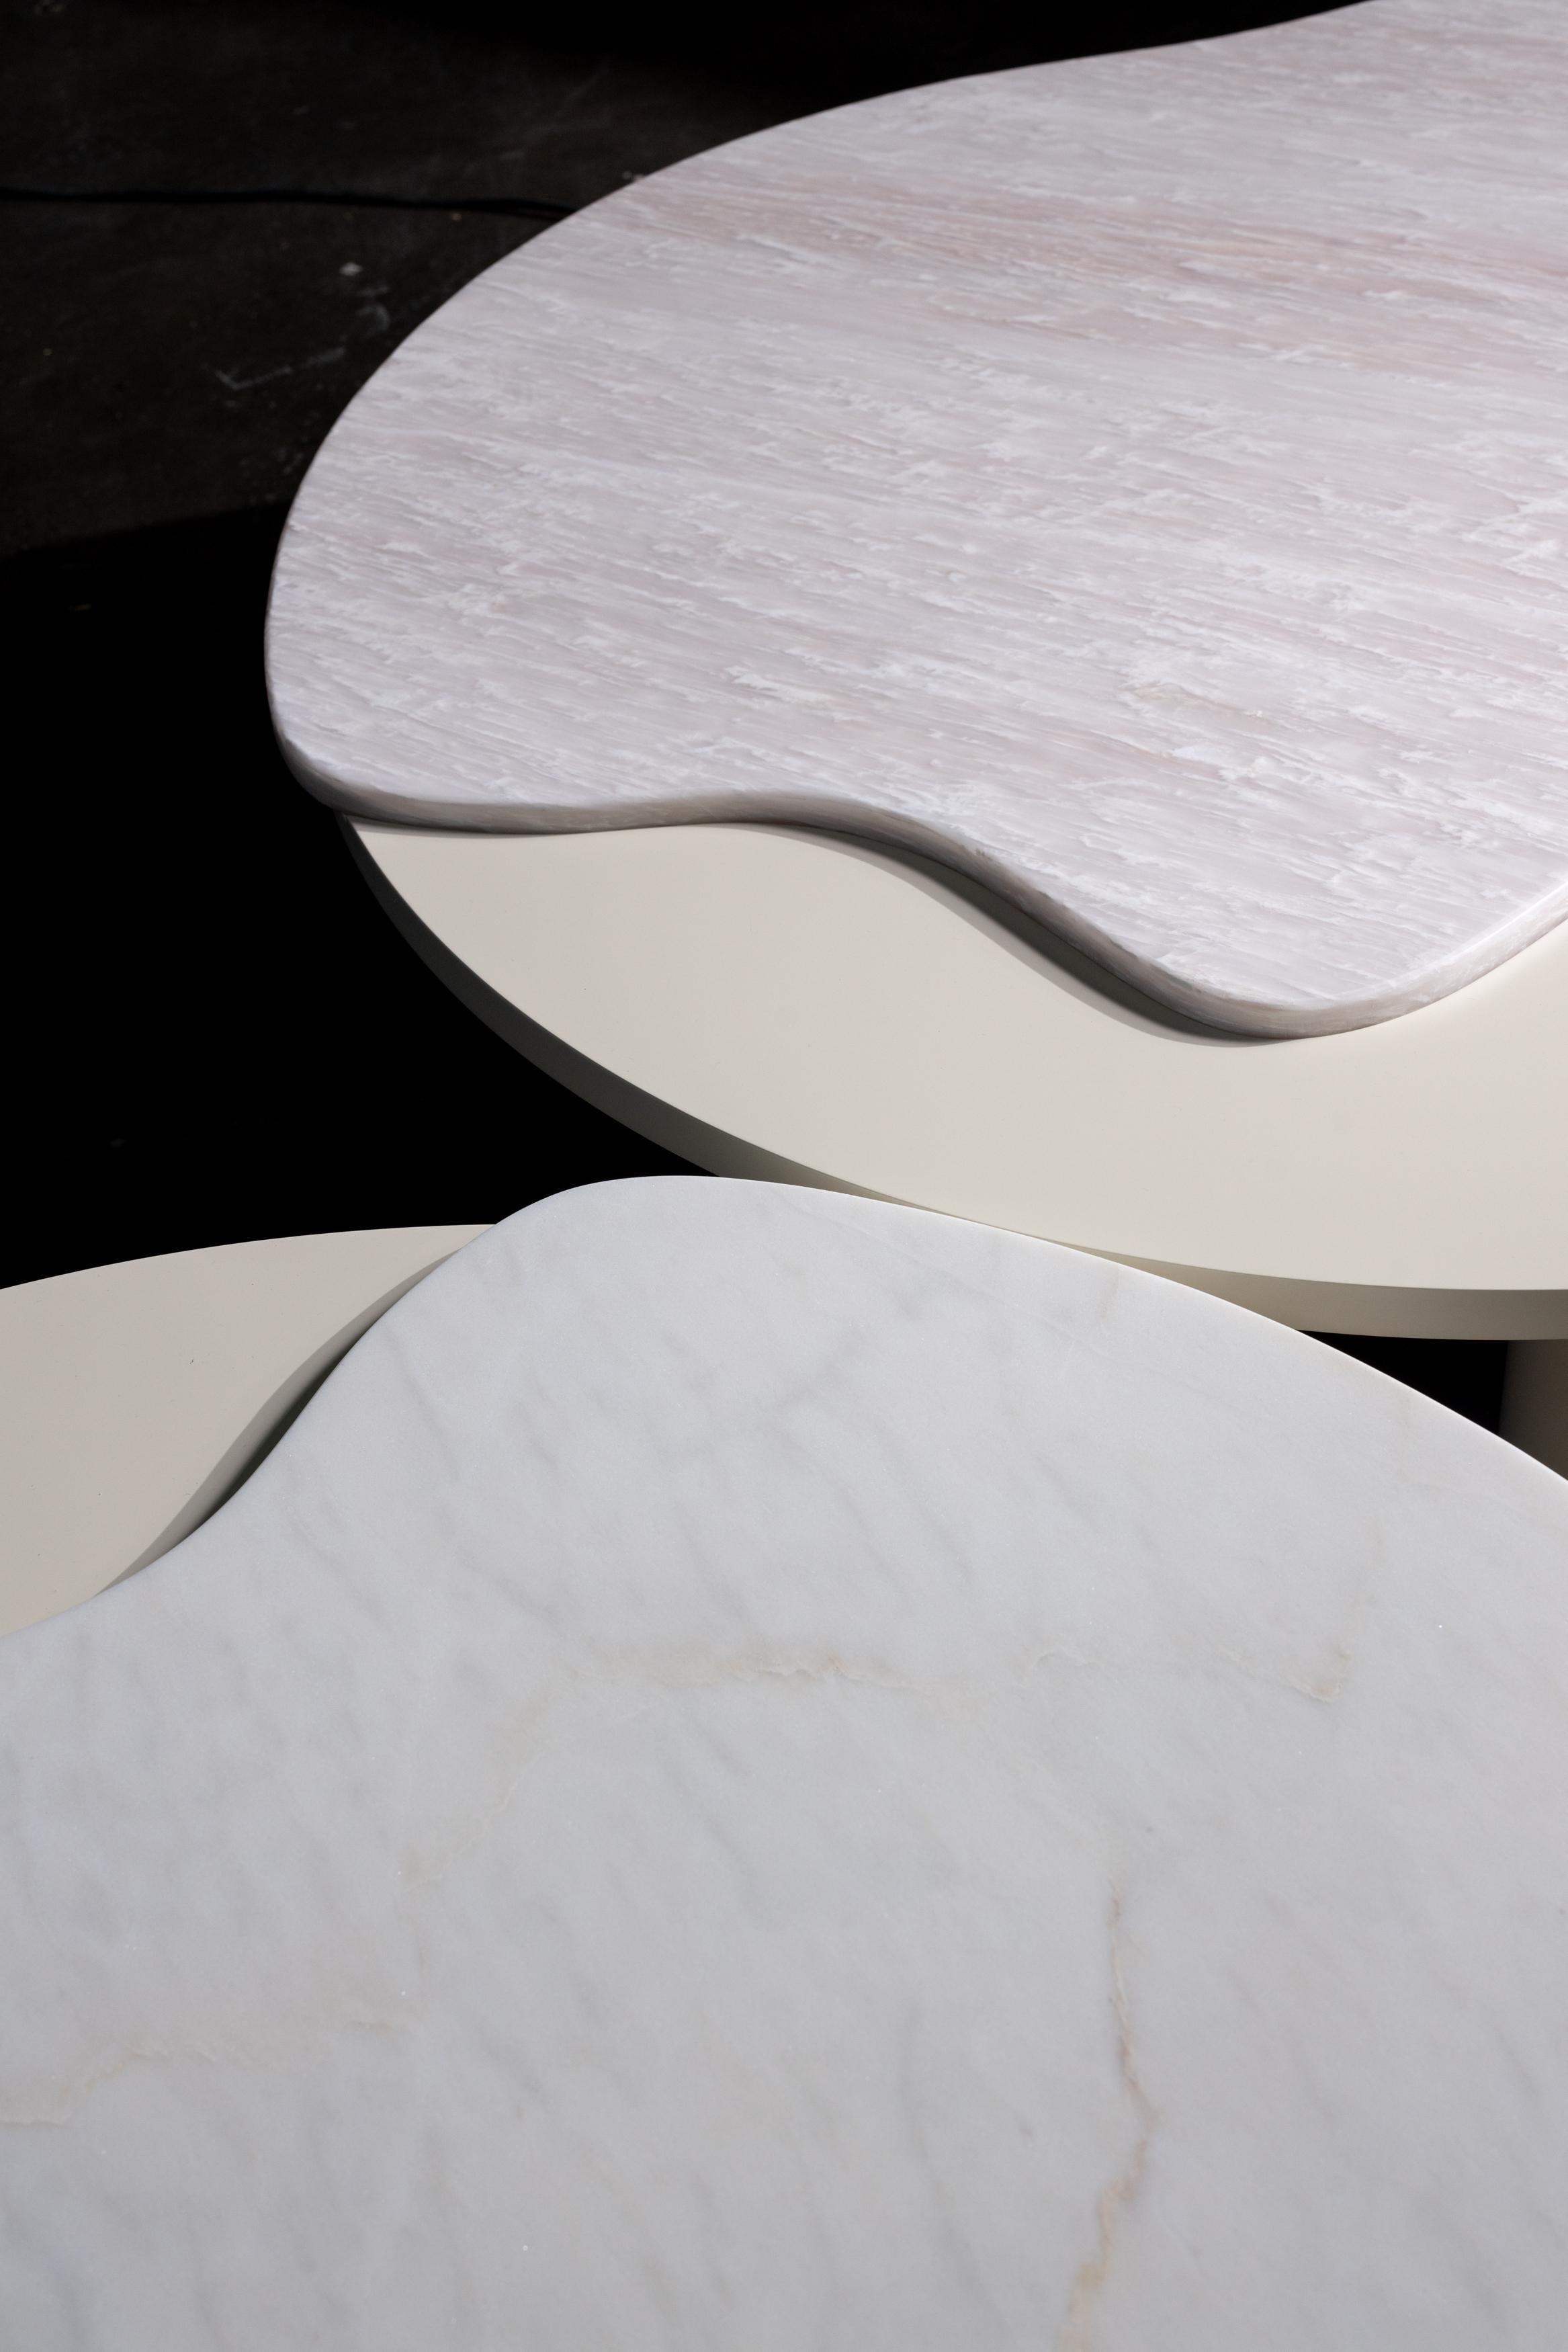 Organic Modern Bordeira Coffee Tables Marble Handmade in Portugal by Greenapple For Sale 1